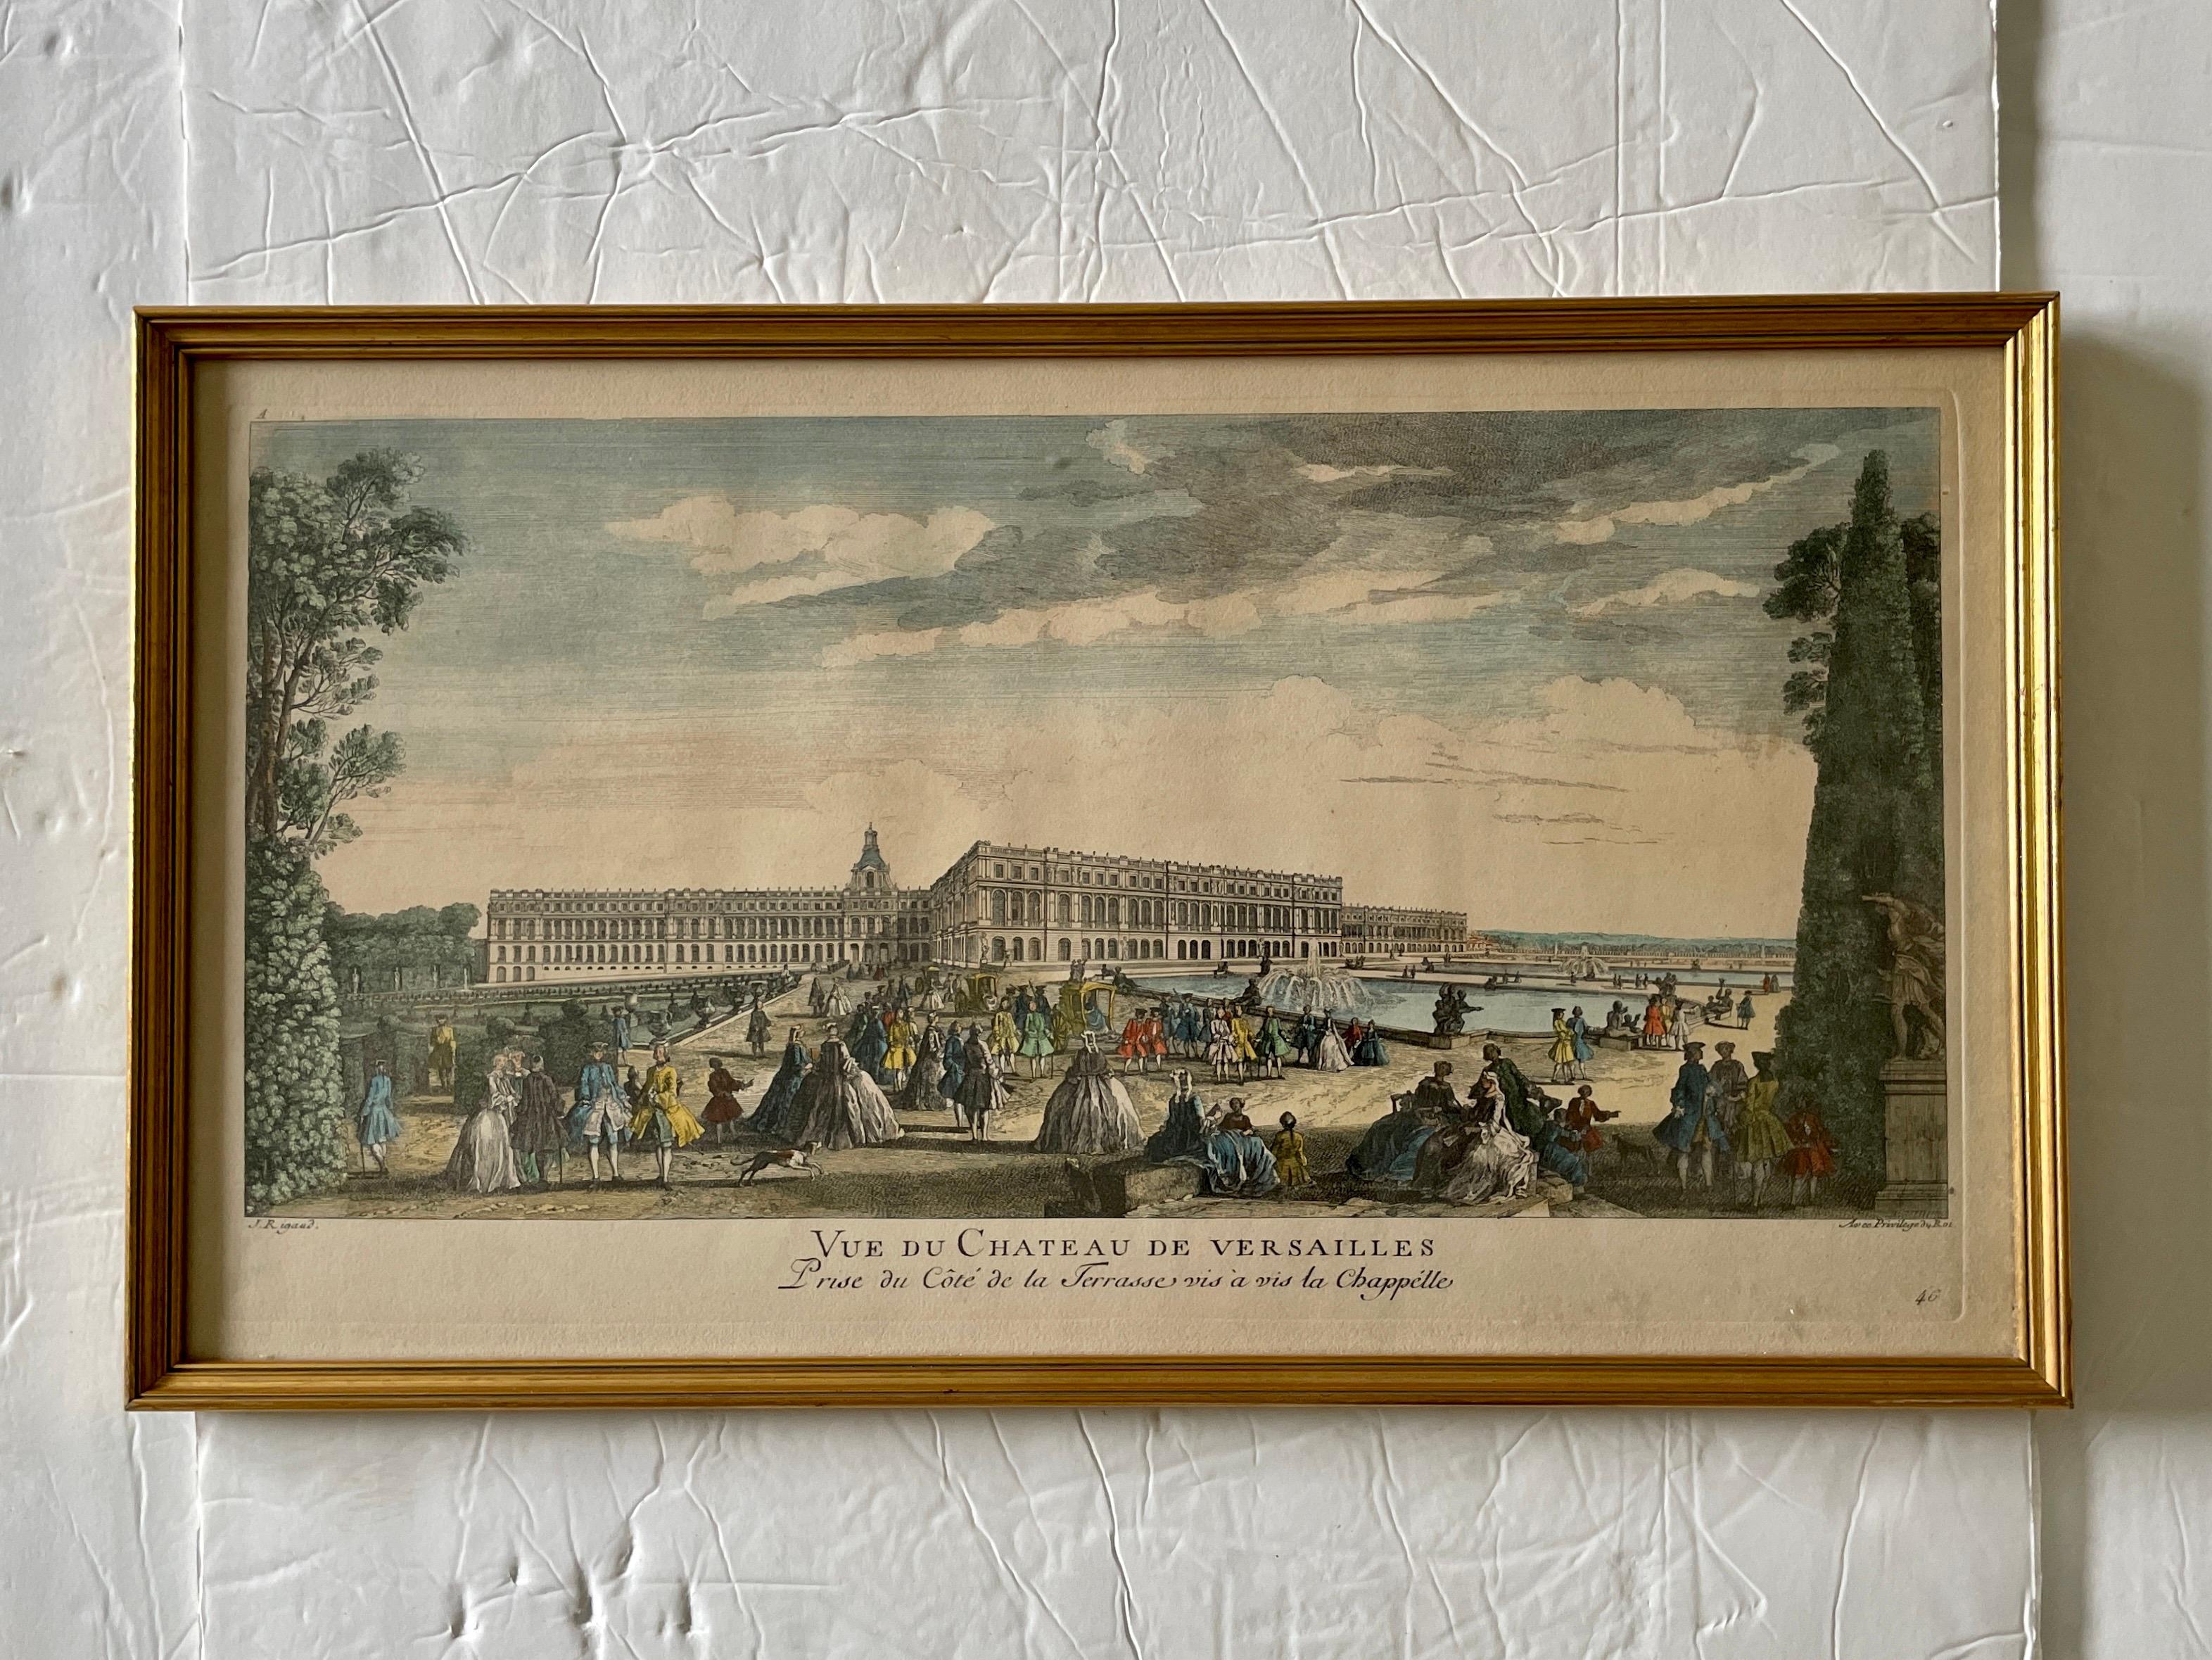 View of Palace of Versailles scene lithograph. This piece includes a frame. We have a total of 5 complimenting French scenes to collect. Add some classic French style to your home.